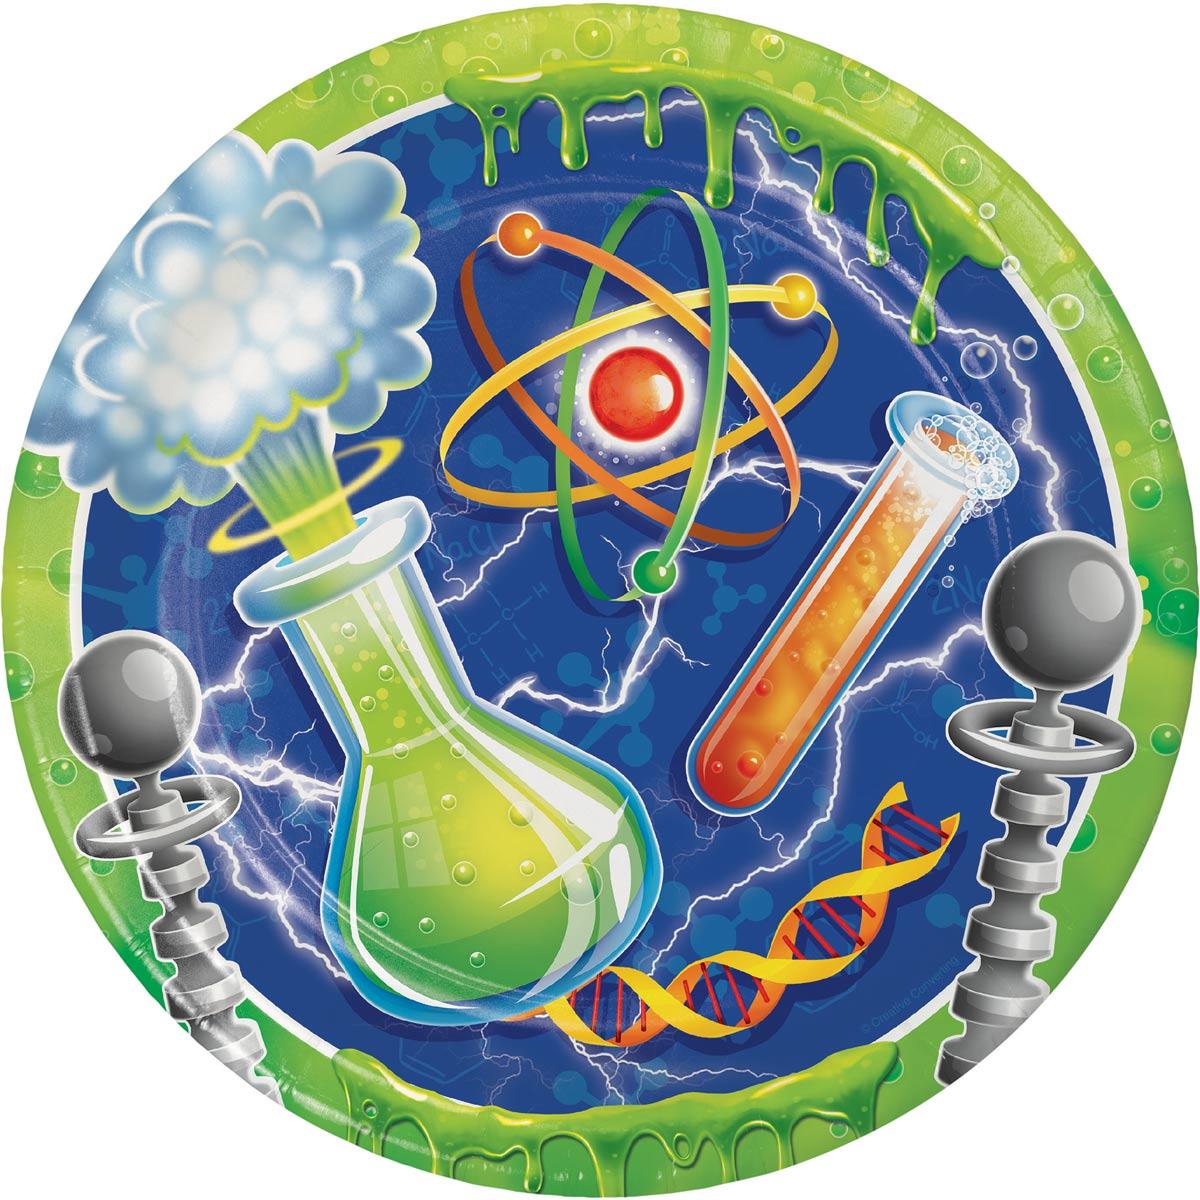 Mad Scientist 9" Dinner Paper Plates by Creative Party 317533 available here at Karnival Costumes online party shop